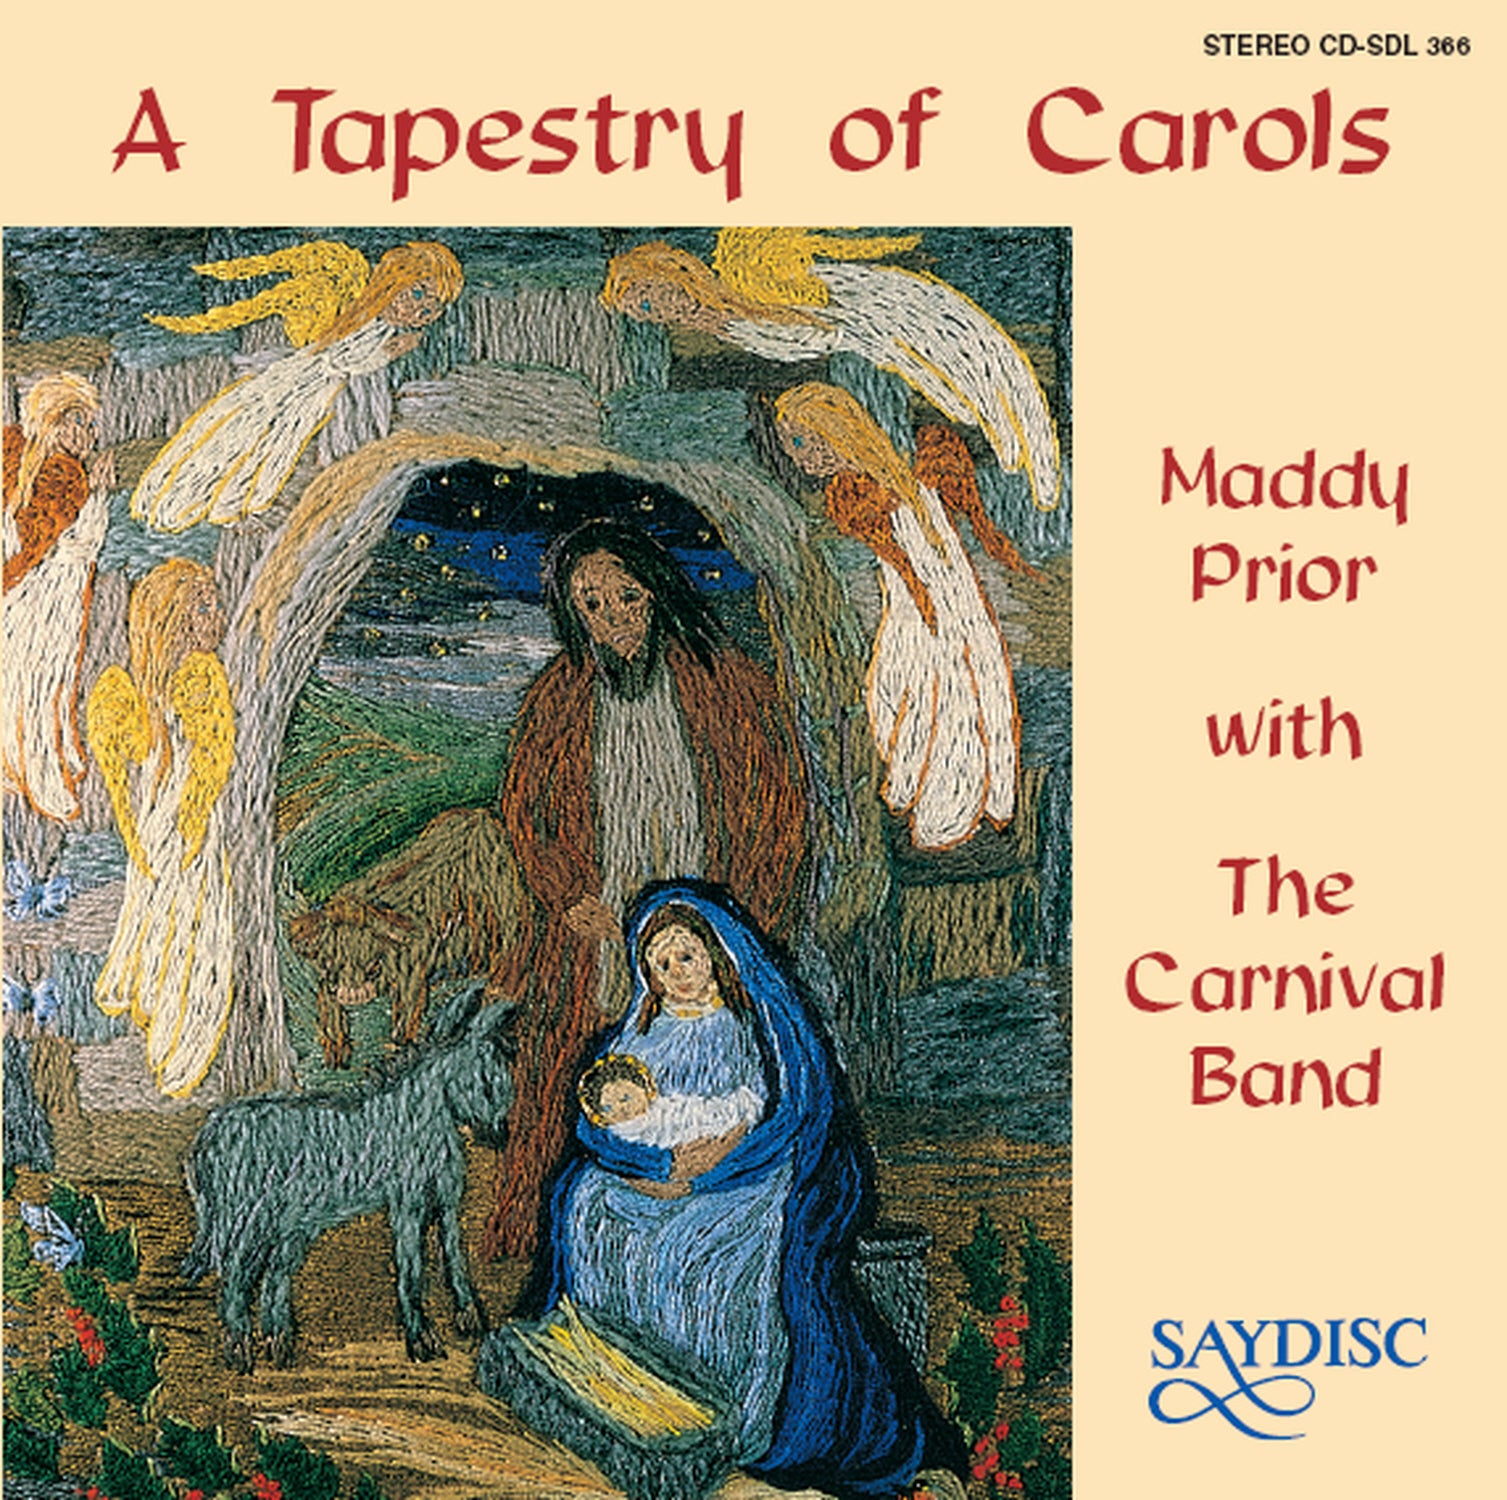 A Tapestry of Carols / The Carnival Band